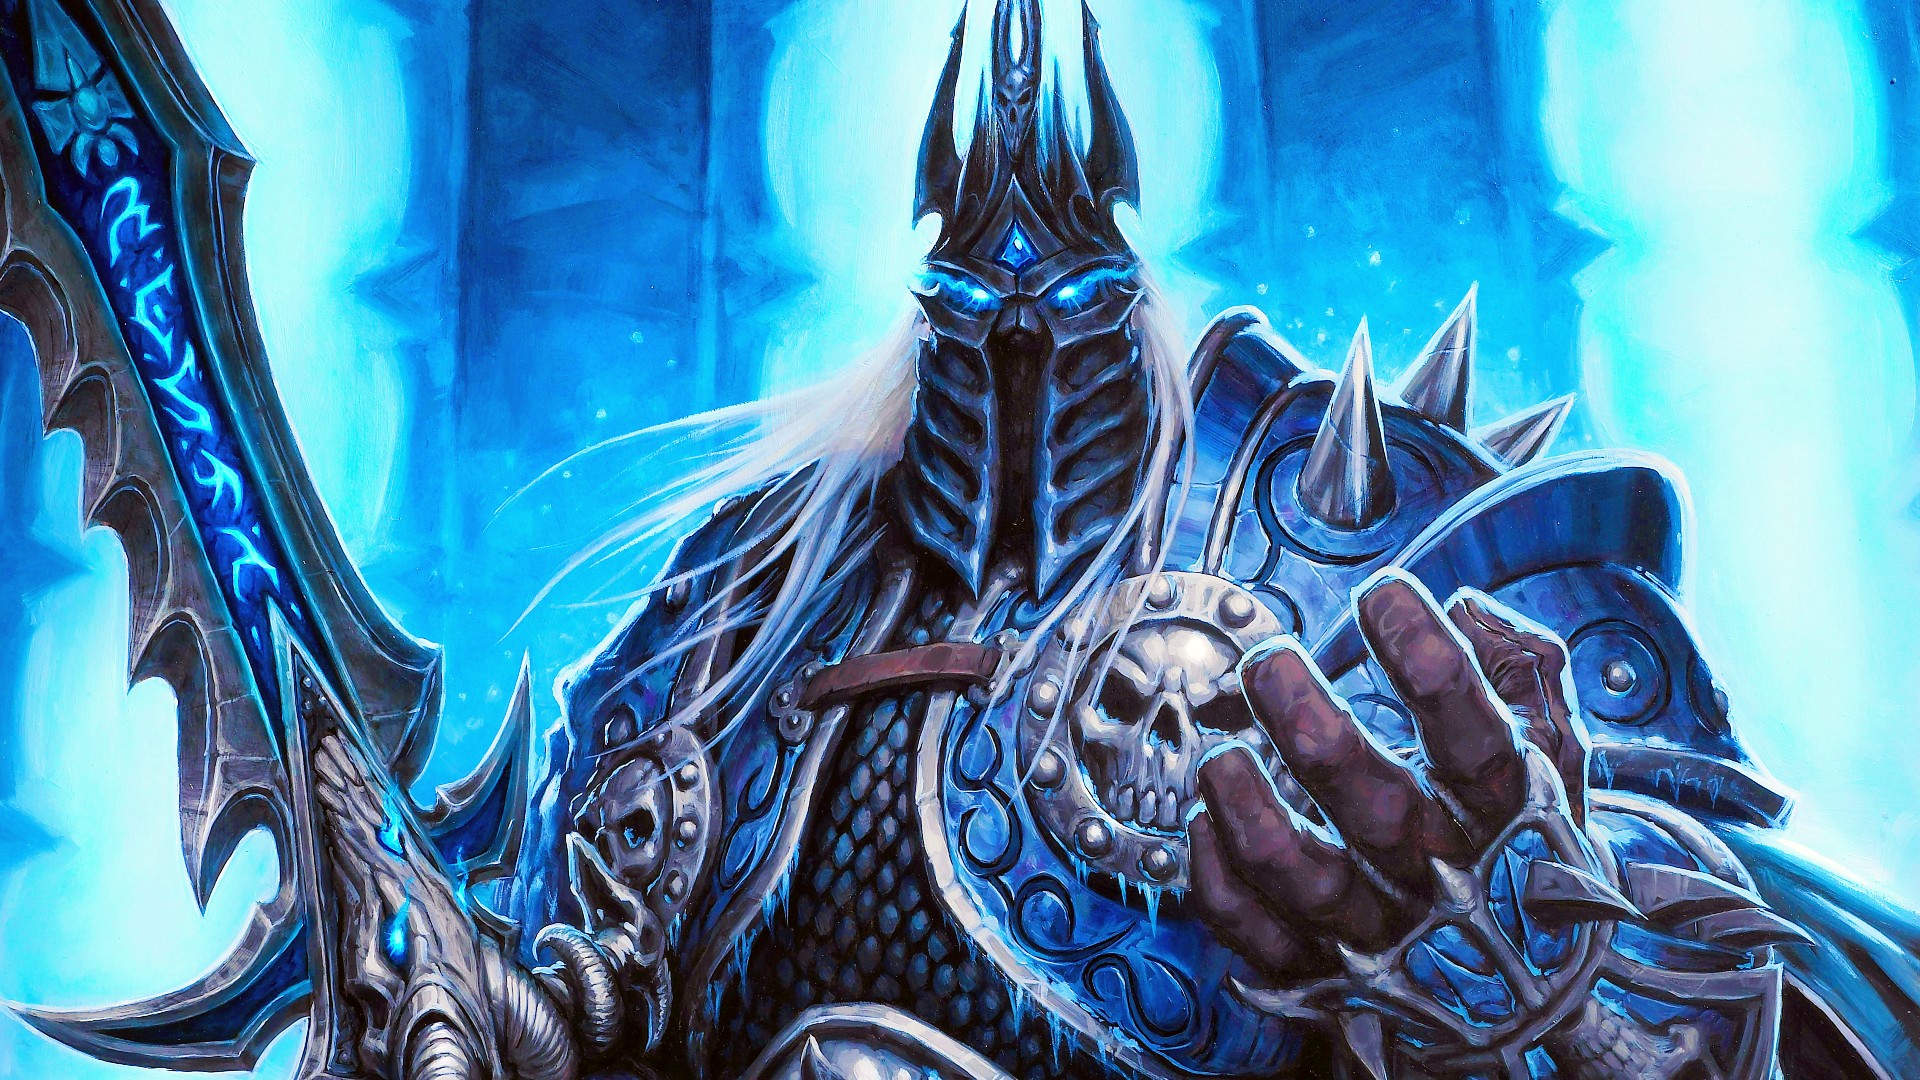 WoW: Wrath of the Lich King Classic release date “leaked” by Blizzard